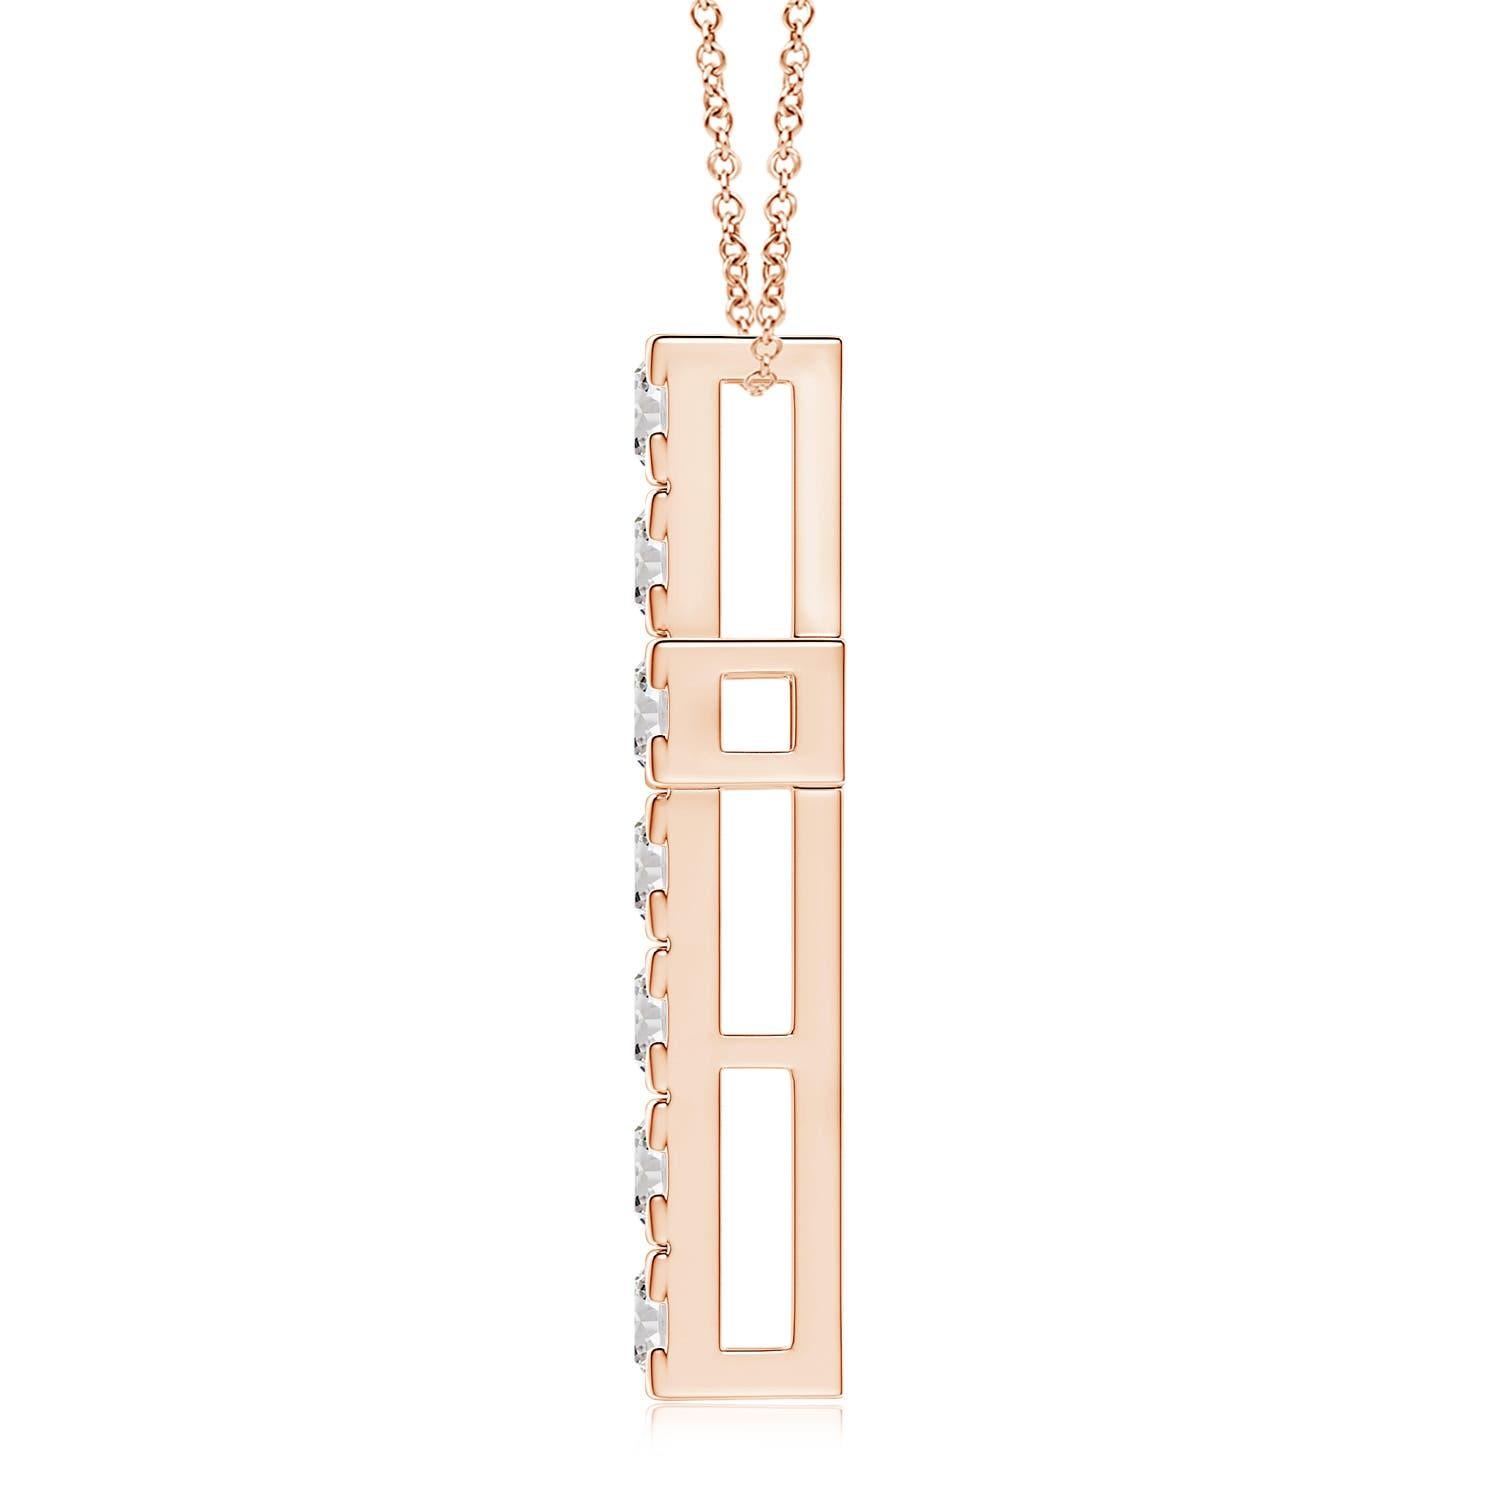 This 14k rose gold cross pendant is a traditional symbol of faith and belief. The brilliant diamonds held in flat prong settings, square off the edges for a sophisticated look.
Diamond is the Birthstone for April and traditional gift for 10th